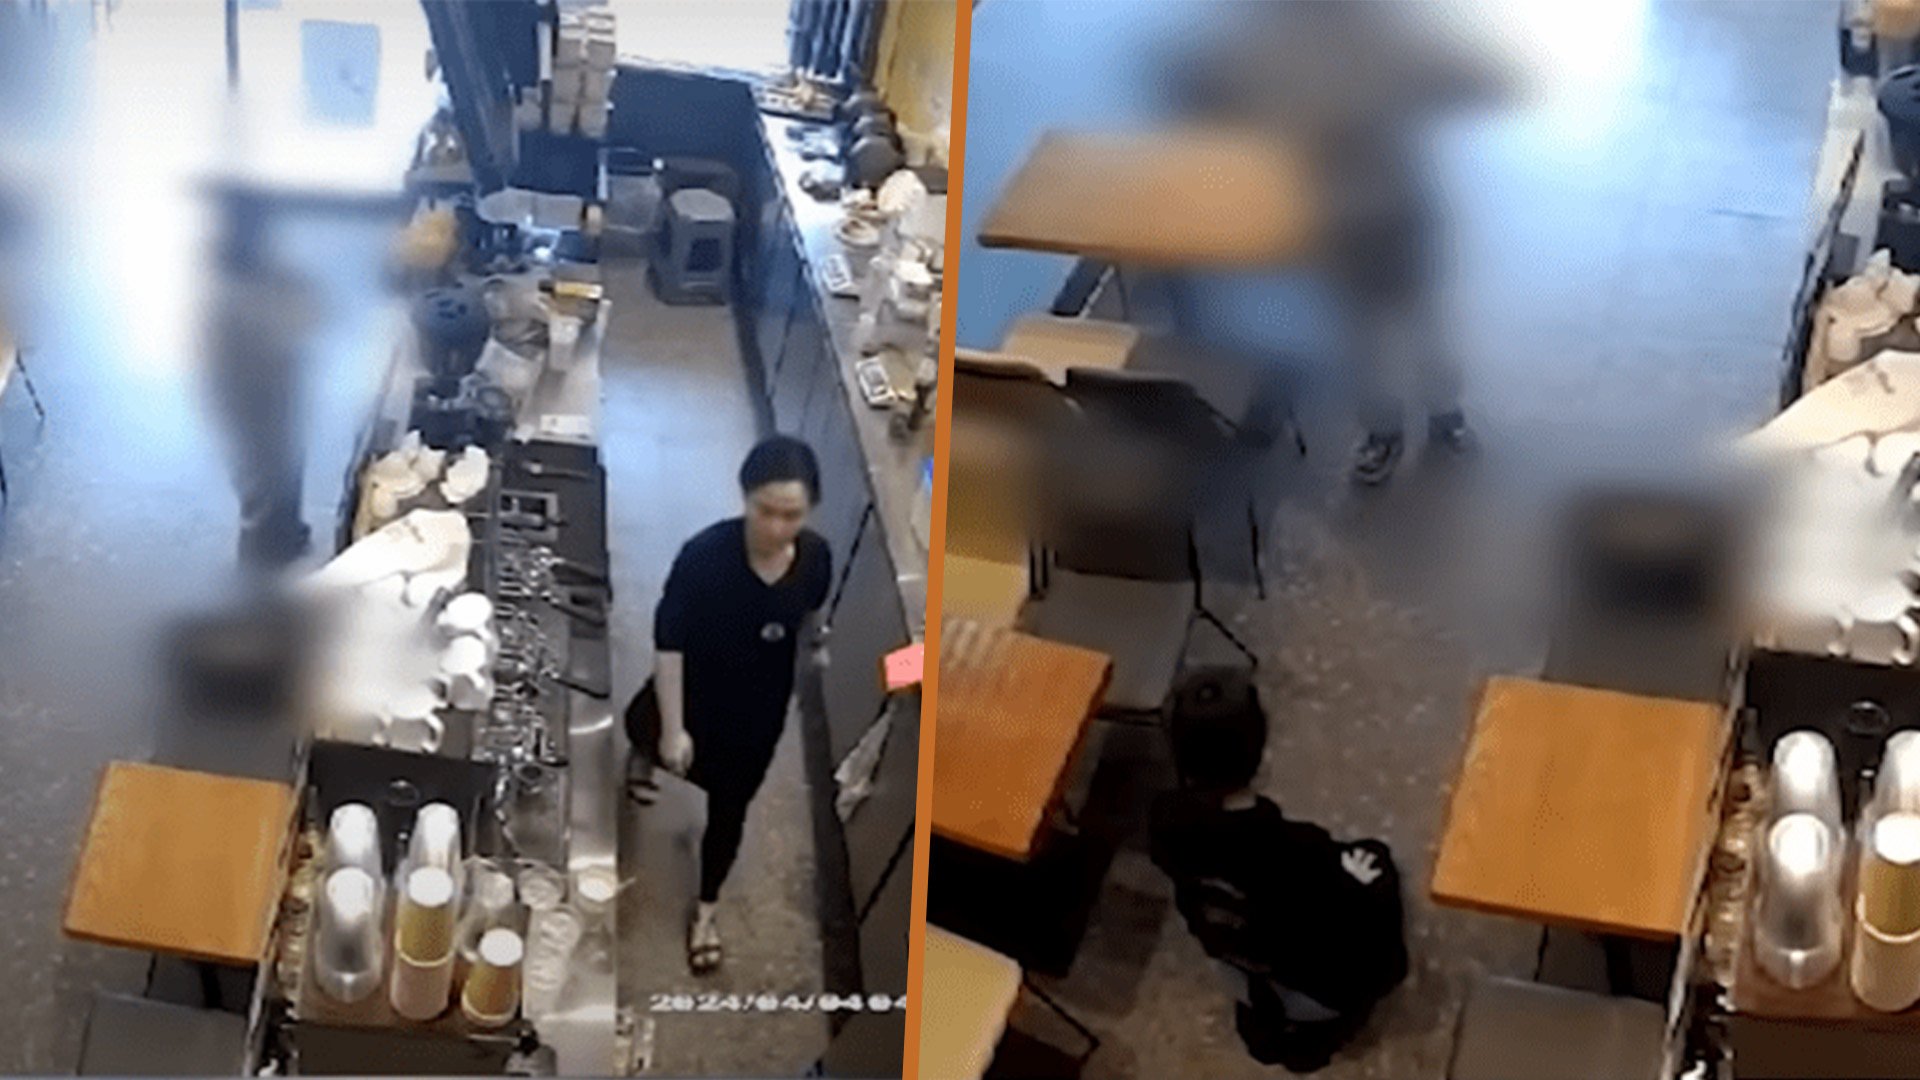 The behaviour of a cafe customer in South Korea who demanded the shop’s manager kneel in apology because there was no straw with her drinks delivery order has caused anger on social media. Photo: SCMP composite/YouTube